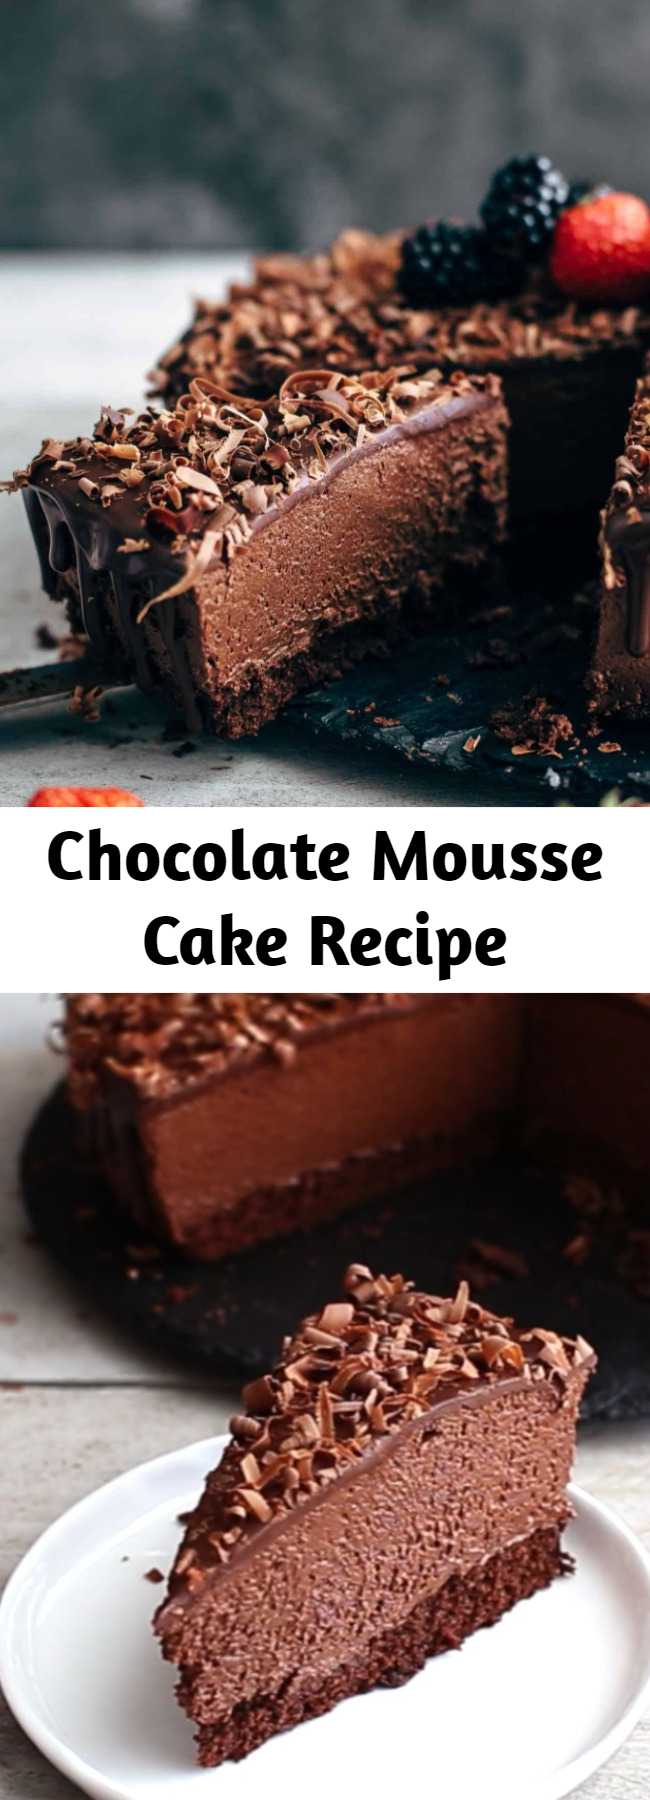 Chocolate Mousse Cake Recipe - This is the perfect Chocolate Mousse Cake recipe. Soft and moist chocolate cake layer topped with super creamy chocolate mousse and soft chocolate ganache. #chocolatemousse #chocolate #mousse #moussecake #cake #baking #desserts #sweets